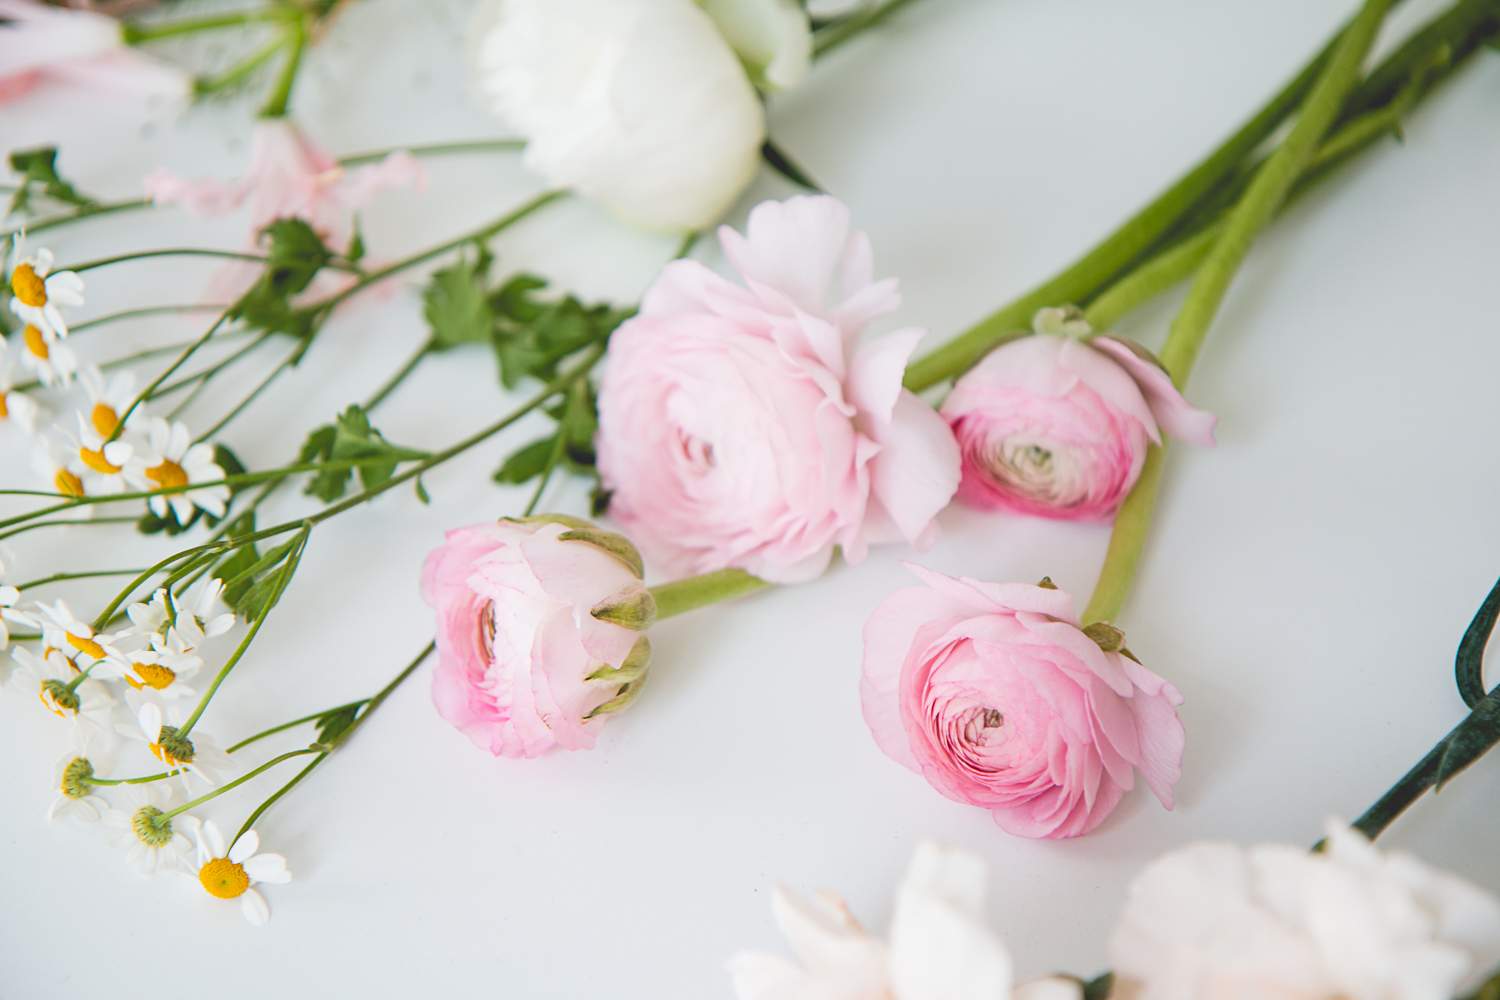 DIY: Bridesmaids Bouquets | The Daily Dose